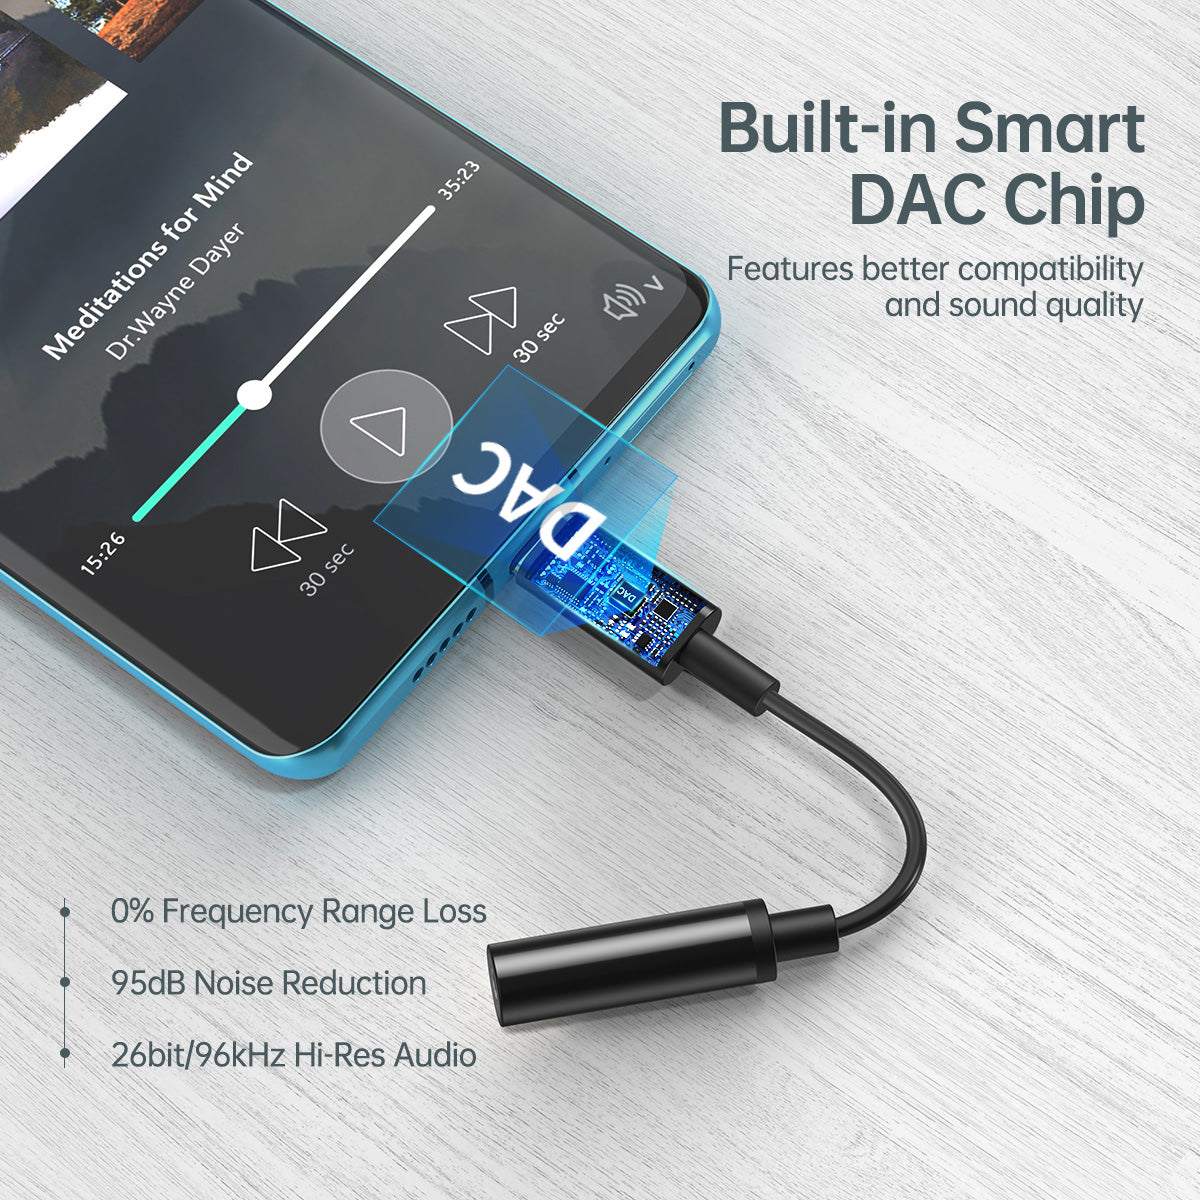 AUX003 Choetech USB-C to 3.5mm Headphone Adapter